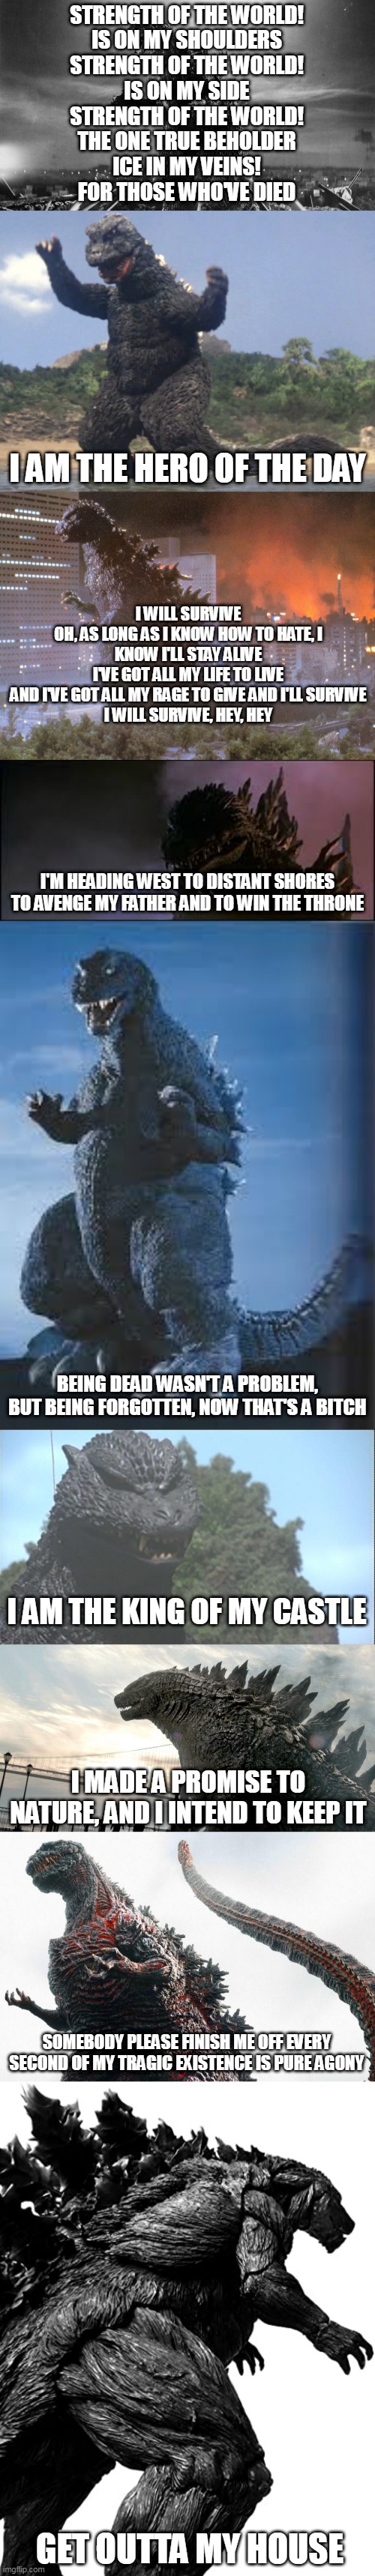 Godzilla Personalities In A Nutshell 2 |  STRENGTH OF THE WORLD!
IS ON MY SHOULDERS
STRENGTH OF THE WORLD!
IS ON MY SIDE
STRENGTH OF THE WORLD!
THE ONE TRUE BEHOLDER
ICE IN MY VEINS!
FOR THOSE WHO'VE DIED; I AM THE HERO OF THE DAY; I WILL SURVIVE
OH, AS LONG AS I KNOW HOW TO HATE, I KNOW I'LL STAY ALIVE
I'VE GOT ALL MY LIFE TO LIVE
AND I'VE GOT ALL MY RAGE TO GIVE AND I'LL SURVIVE
I WILL SURVIVE, HEY, HEY; I'M HEADING WEST TO DISTANT SHORES TO AVENGE MY FATHER AND TO WIN THE THRONE; BEING DEAD WASN'T A PROBLEM, BUT BEING FORGOTTEN, NOW THAT'S A BITCH; I AM THE KING OF MY CASTLE; I MADE A PROMISE TO NATURE, AND I INTEND TO KEEP IT; SOMEBODY PLEASE FINISH ME OFF EVERY SECOND OF MY TRAGIC EXISTENCE IS PURE AGONY; GET OUTTA MY HOUSE | image tagged in godzilla,personality,emotion,character,description,nutshell | made w/ Imgflip meme maker